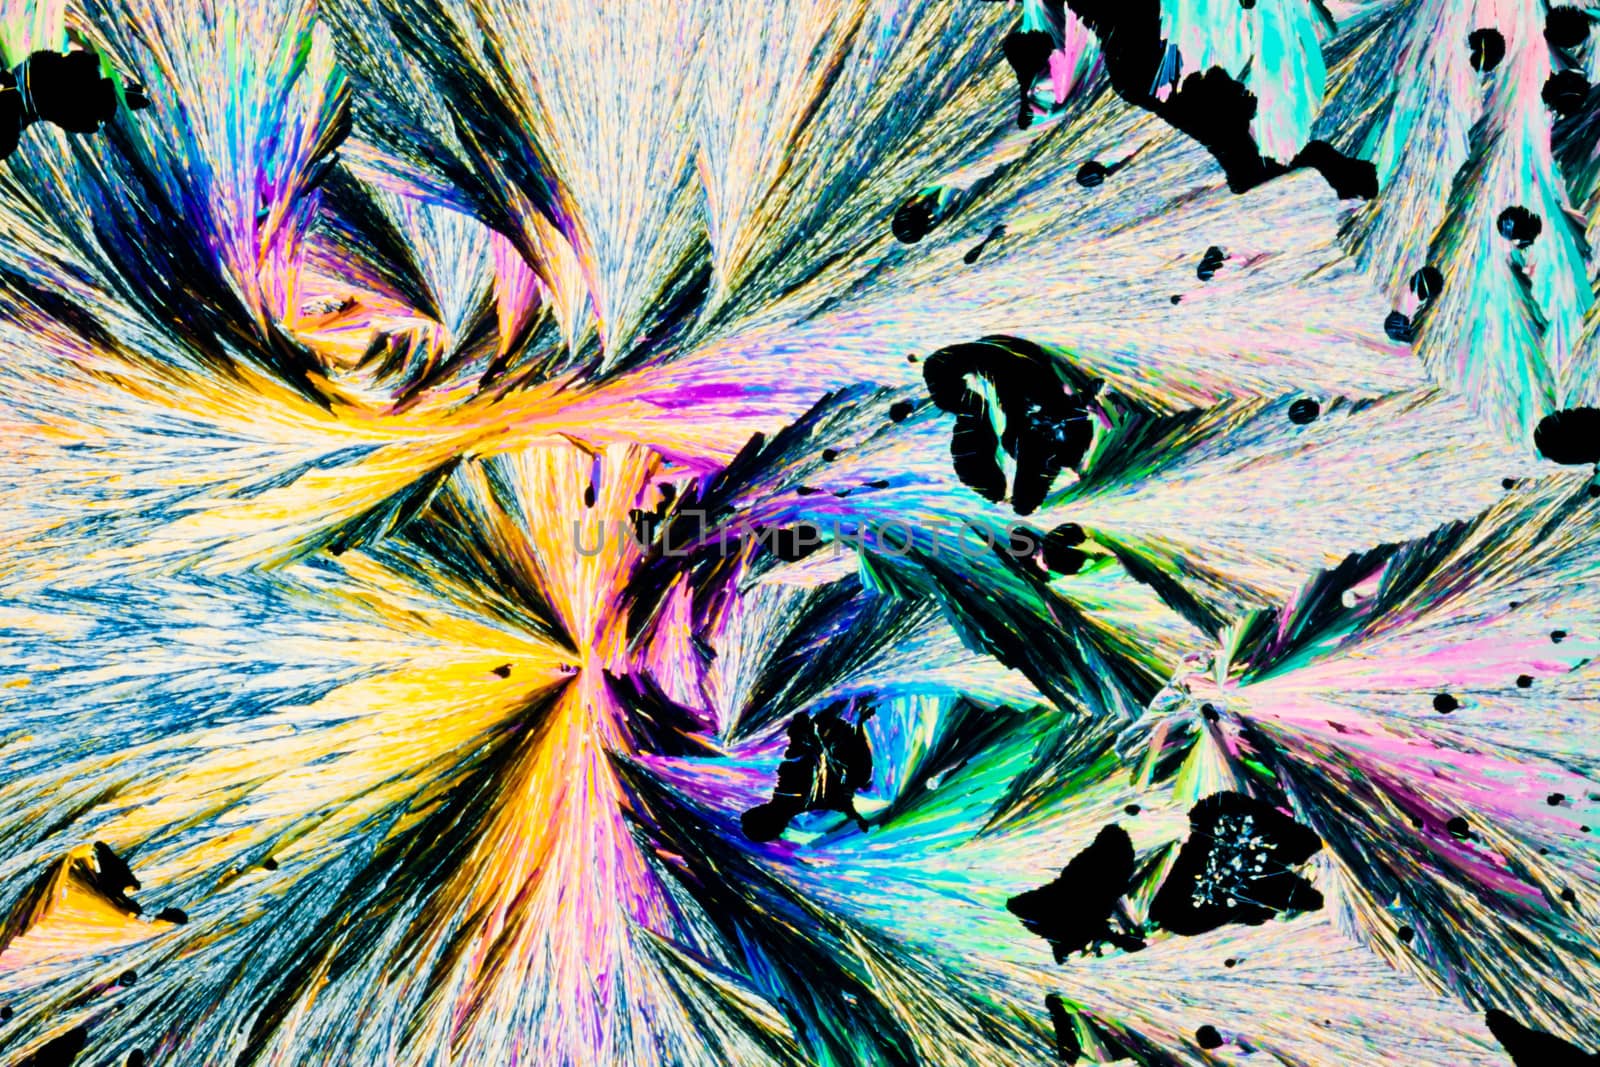 Colorful appearance of crystals of benzoic acid, a food preserving additive, in polarized light.